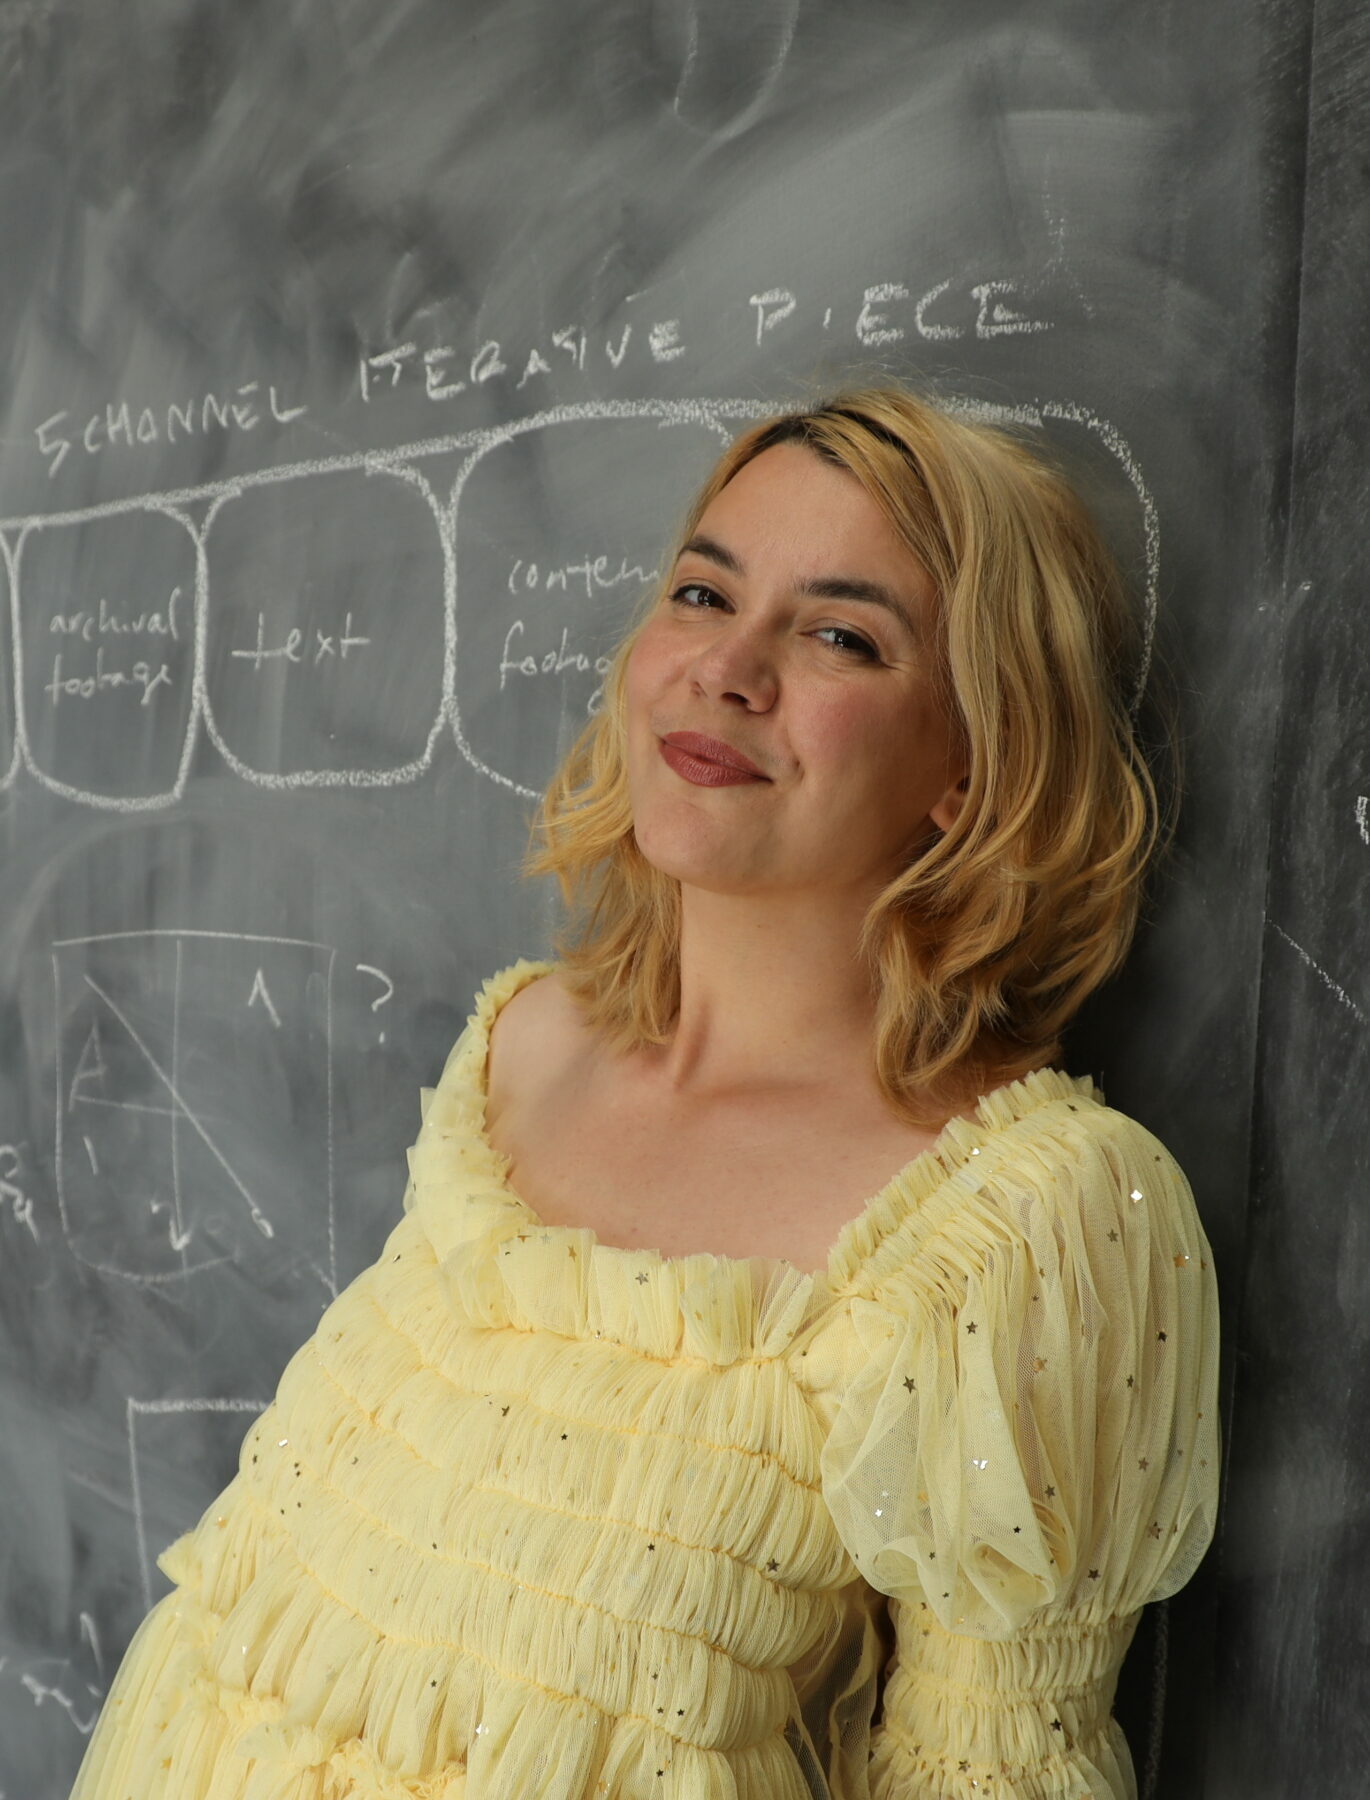 A person with shoulder-length blonde hair and red lipstick leans against a blackboard and smiles closed-lipped